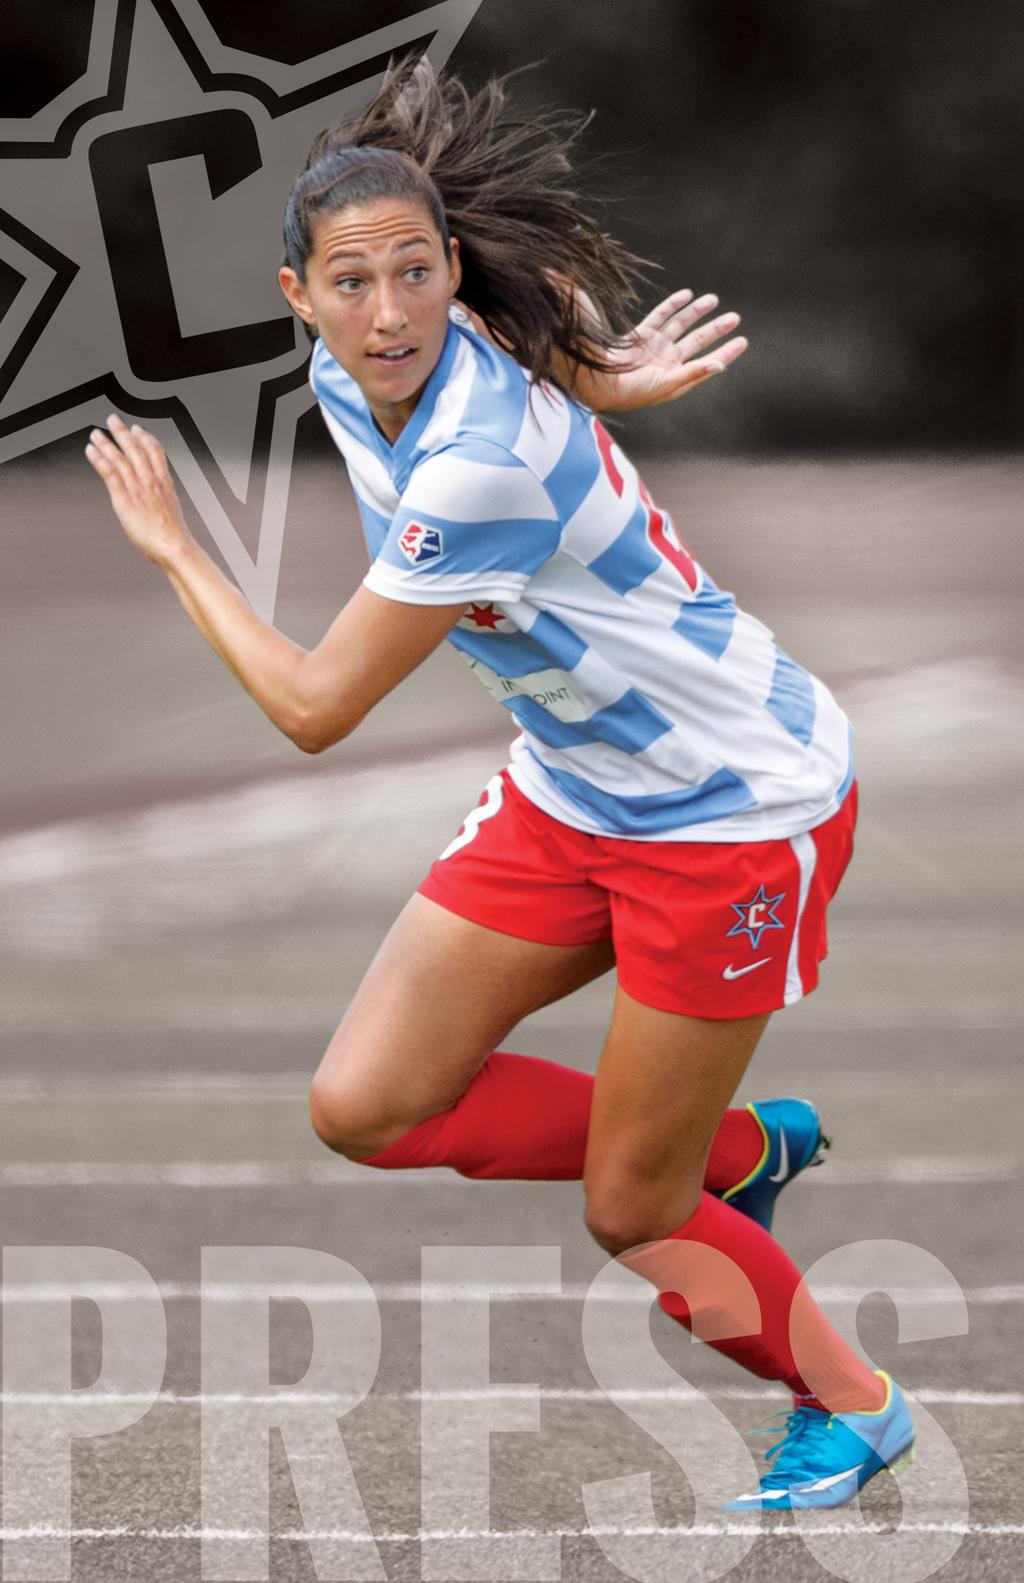 23 Christen Press POSITION: FORWARD HEIGHT: 5-7 BORN: DECEMBER 29, 1988 HOMETOWN: PALOS VERDES, CA COLLEGE: STANFORD UNIVERSITY INTERNATIONAL: 2016: Appeared in all eleven games the U.S. has played (as of 4/12/16) 4 goals and 2 assists 2015: Member of the 2015 FIFA Women s World Cup champion U.